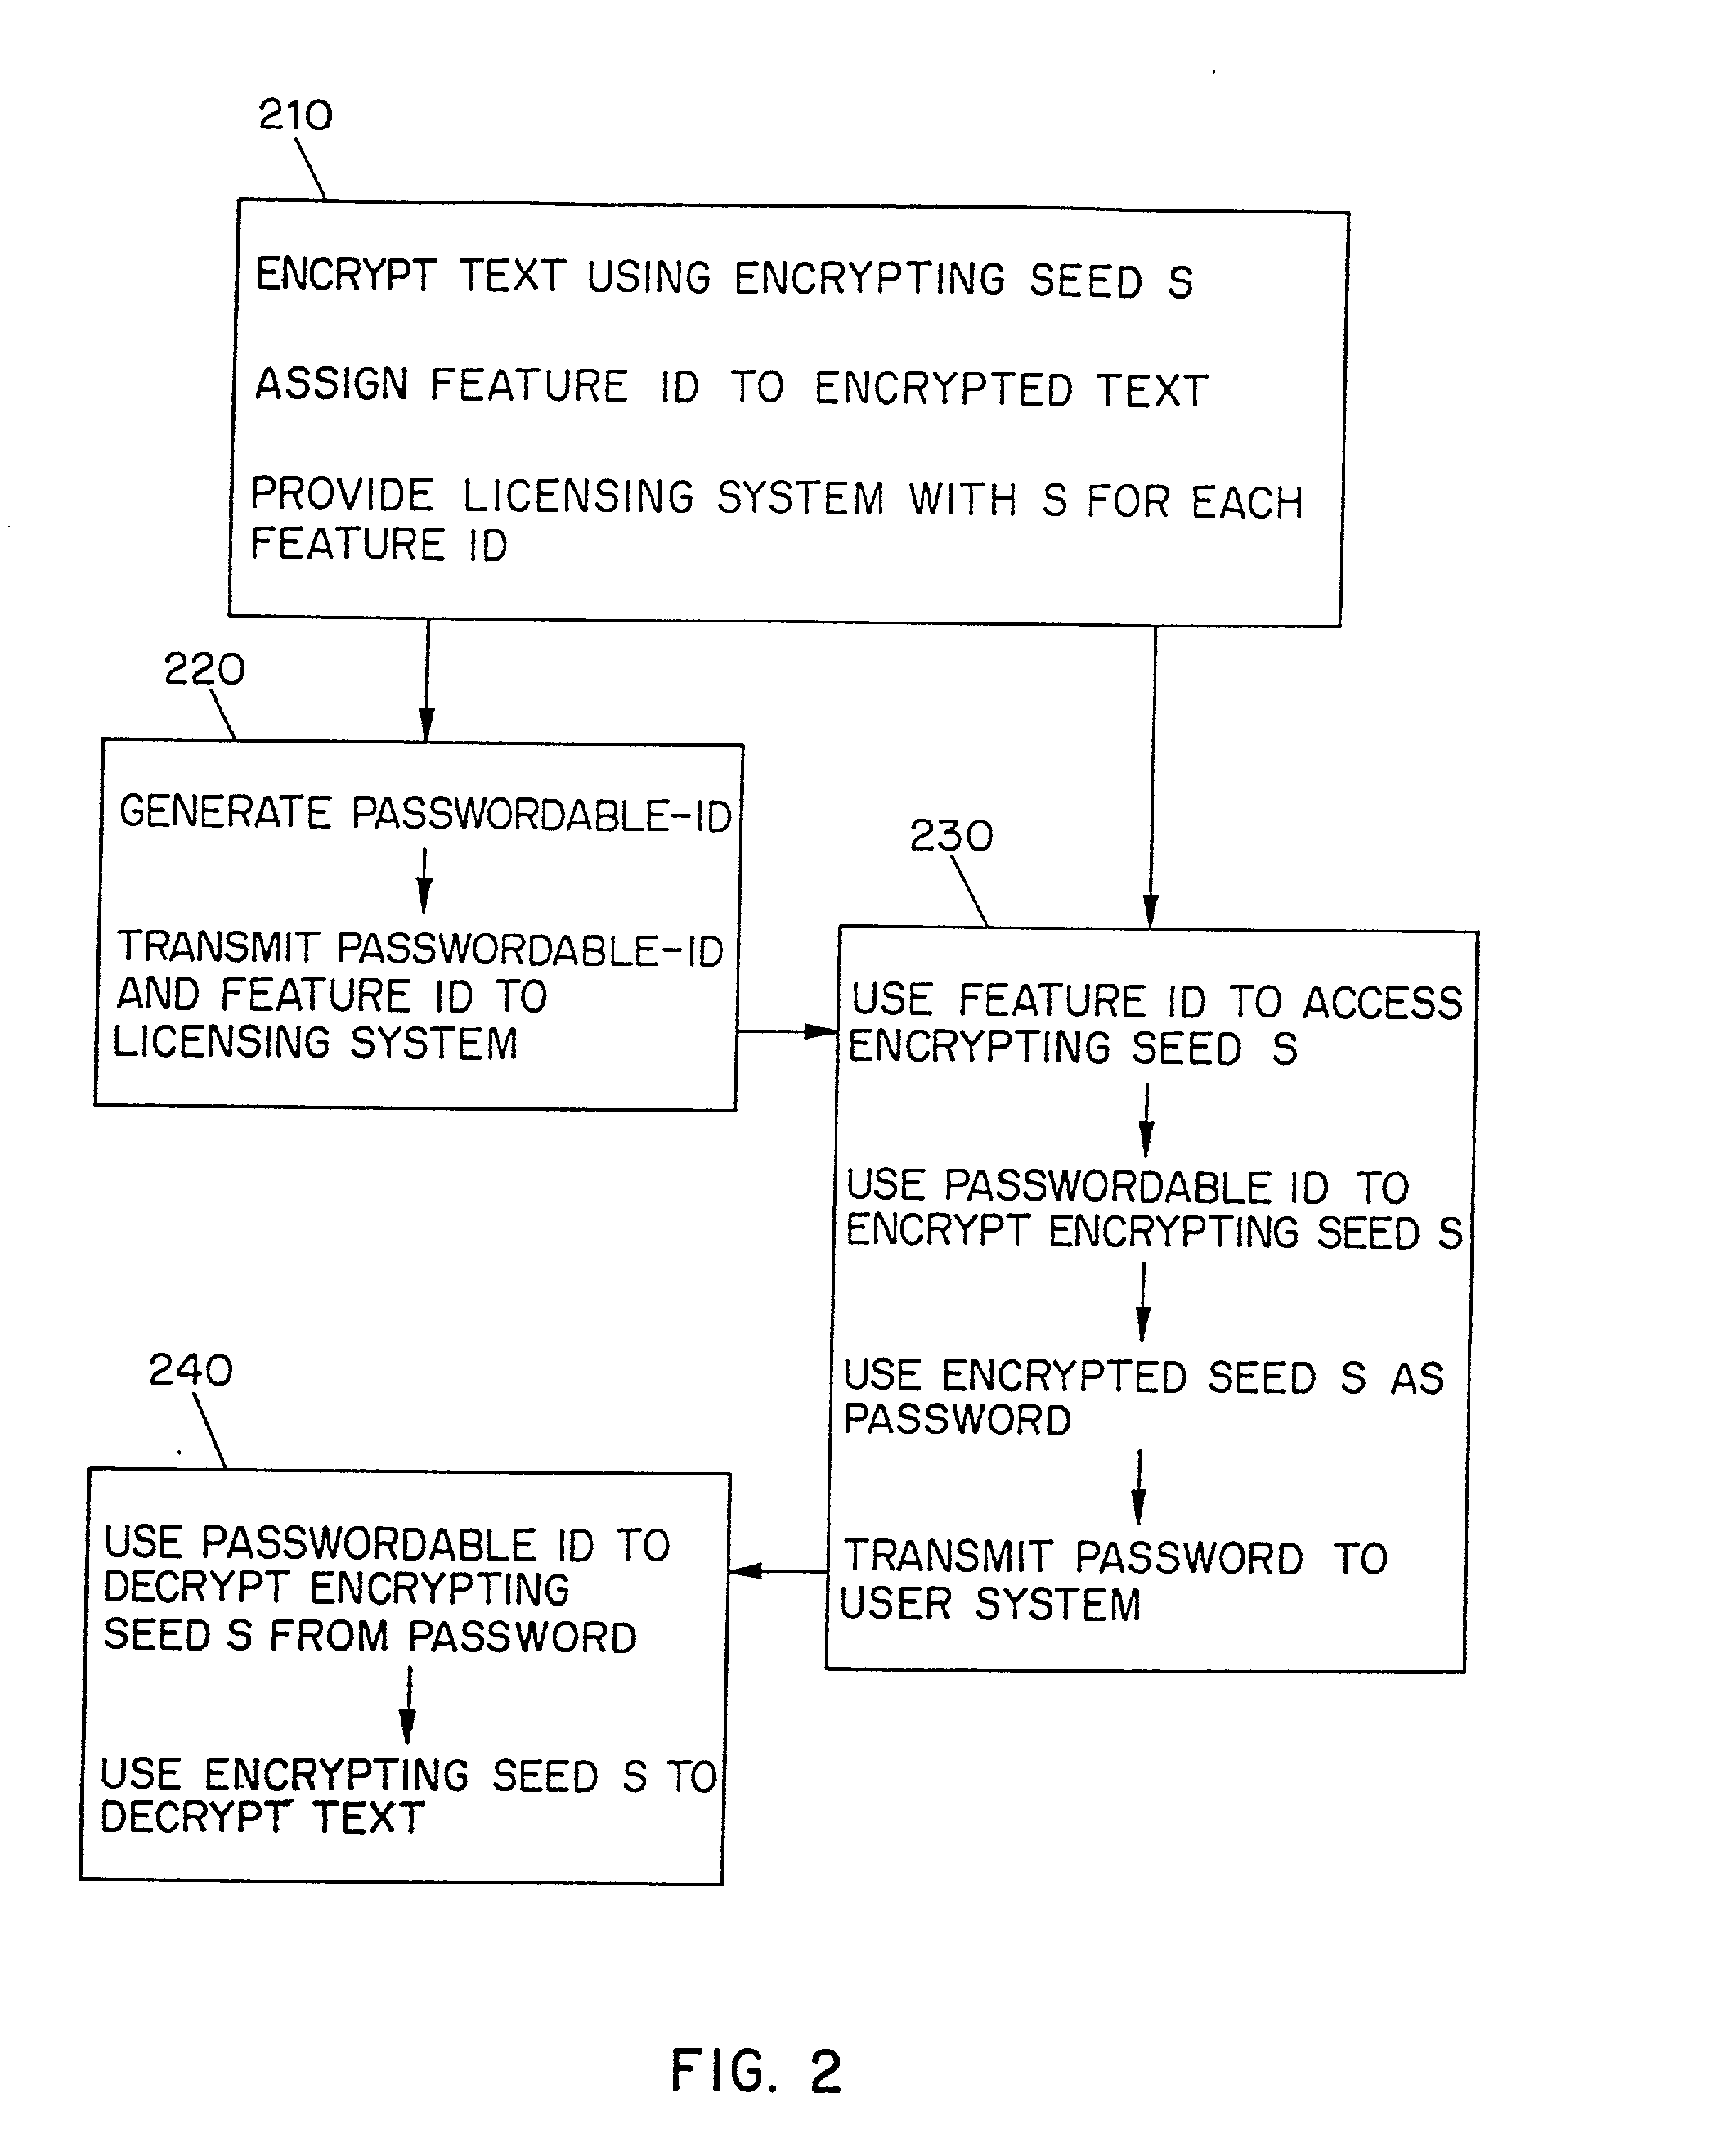 Method for selling, protecting, and redistributing digital goods